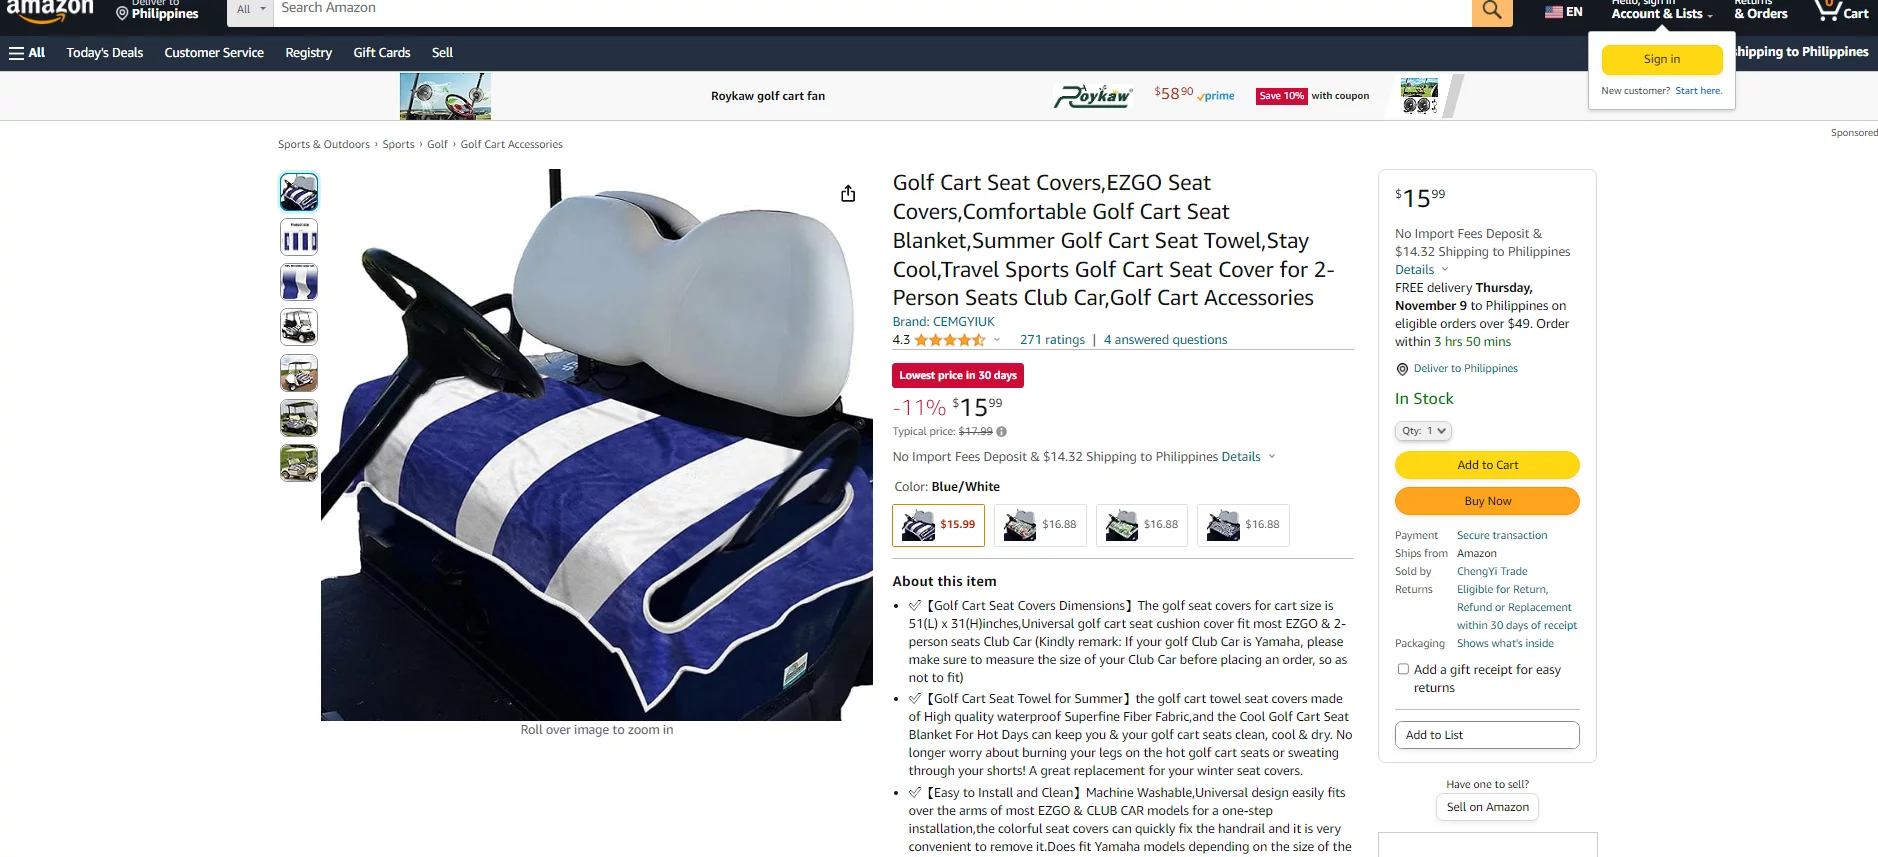 Must-Have Golf Cart Accessories for Dropshipping